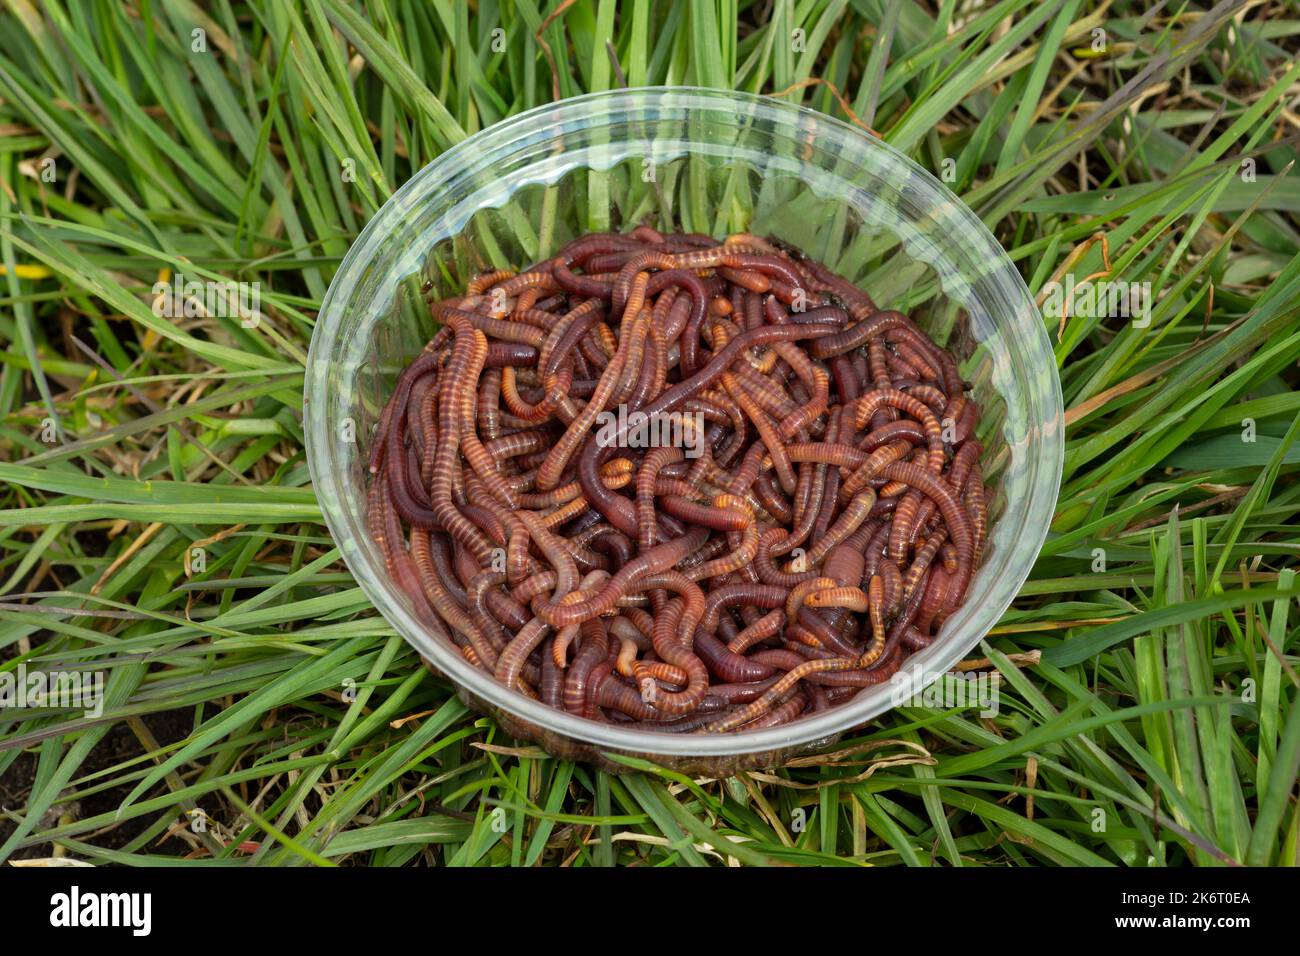 Worms in a jar on green grass, fishing bait and compost worms in a